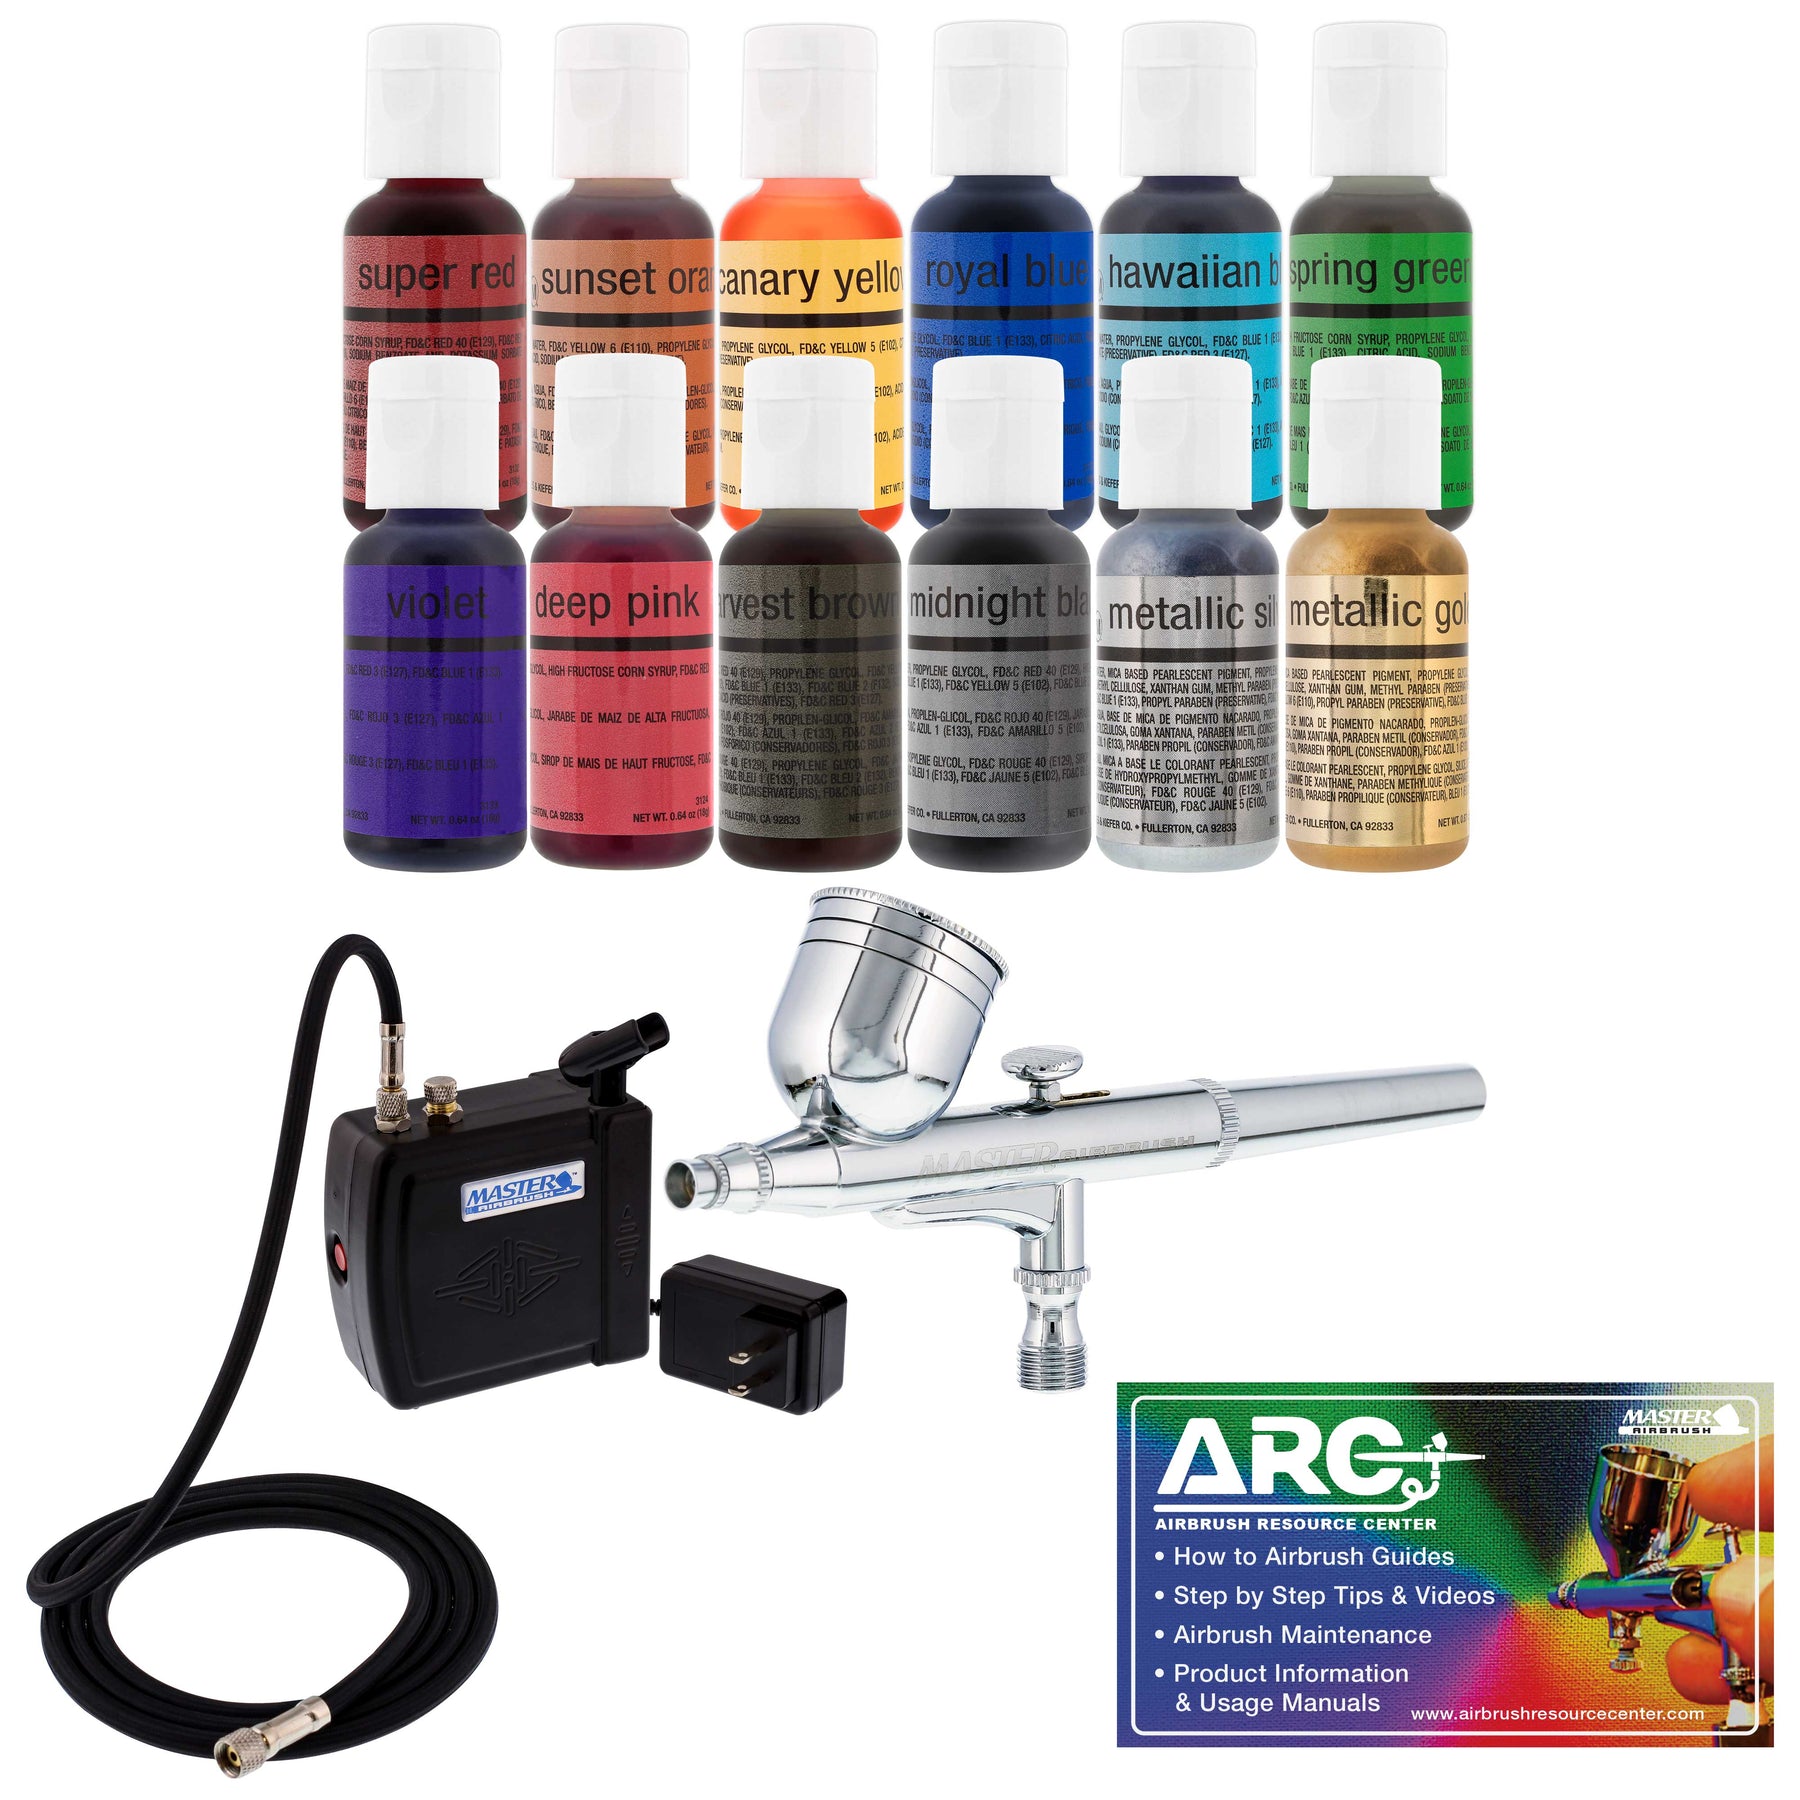 Master G22 airbrush review. One of the most popular airbrushes on